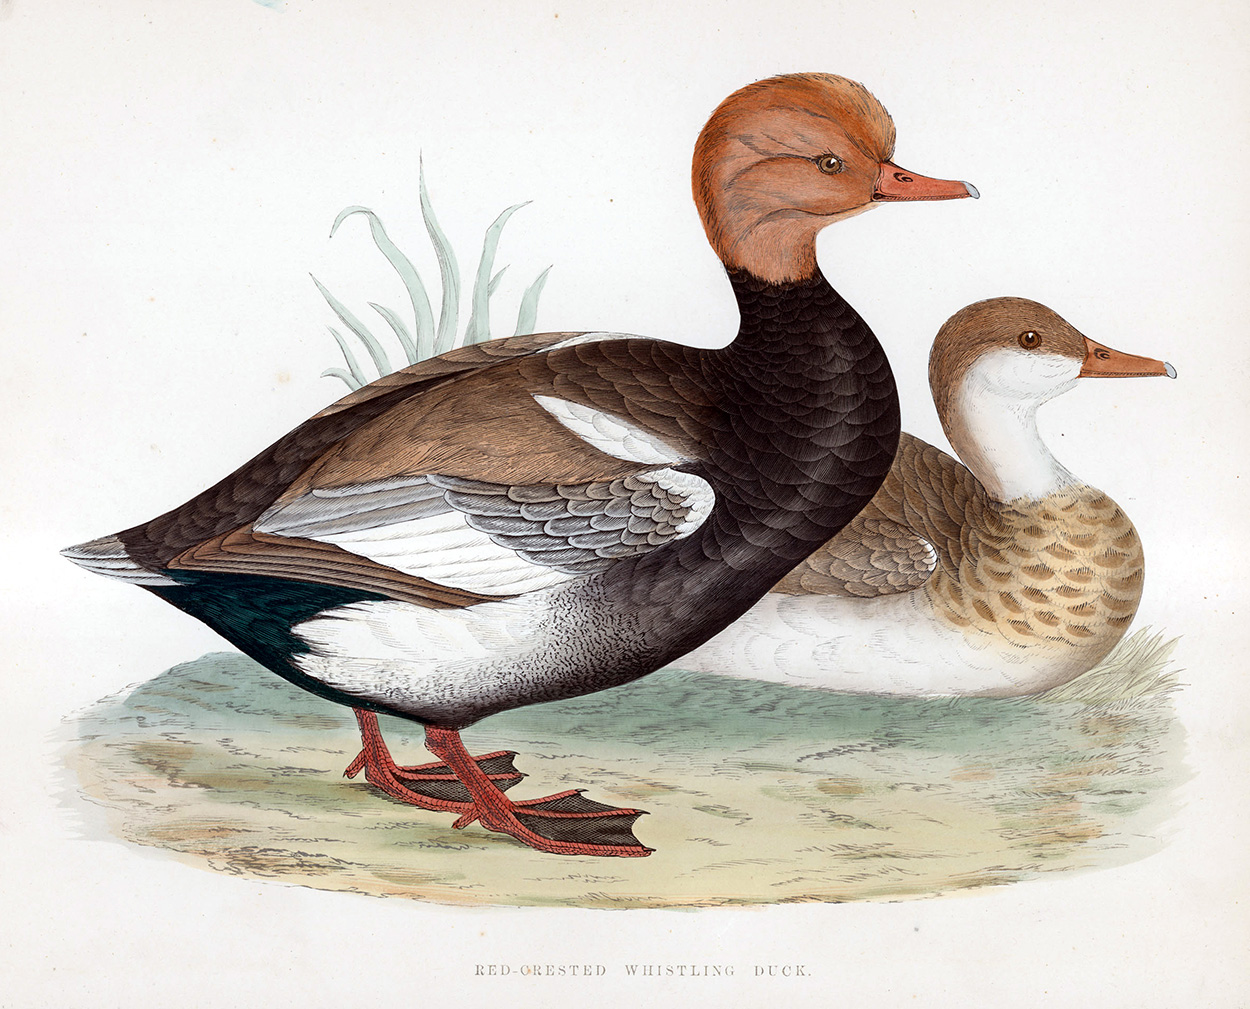 Red Crested Whistling Duck - hand coloured lithograph 1891 (Print) art by Beverley R Morris at The Illustration Art Gallery